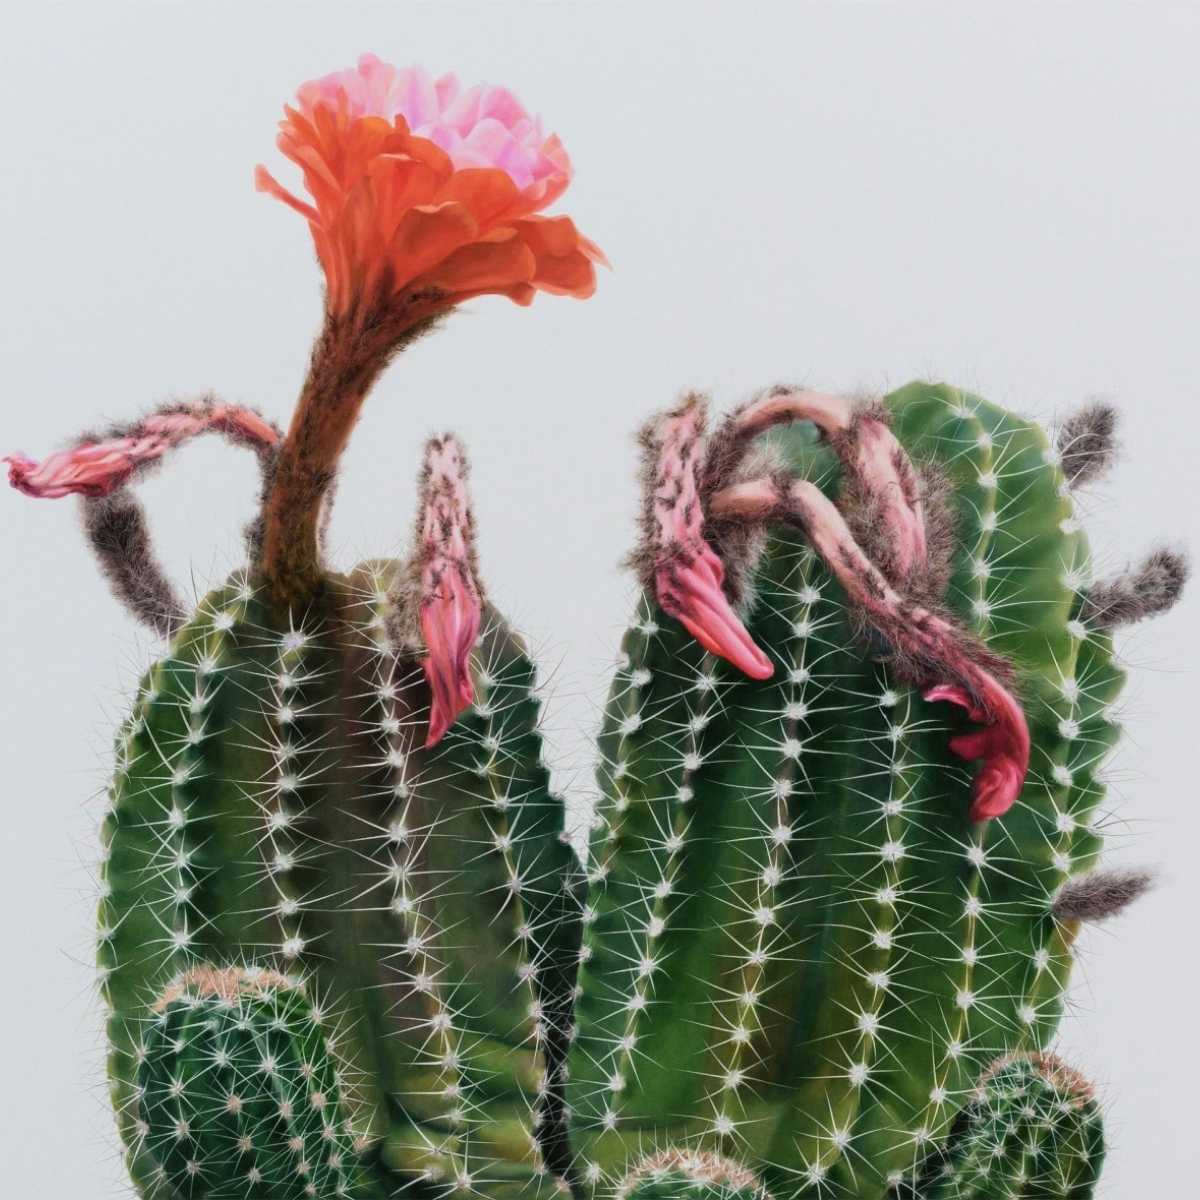 kwang-ho-lee-brings-cacti-to-life-in-his-giant-paintings-featured